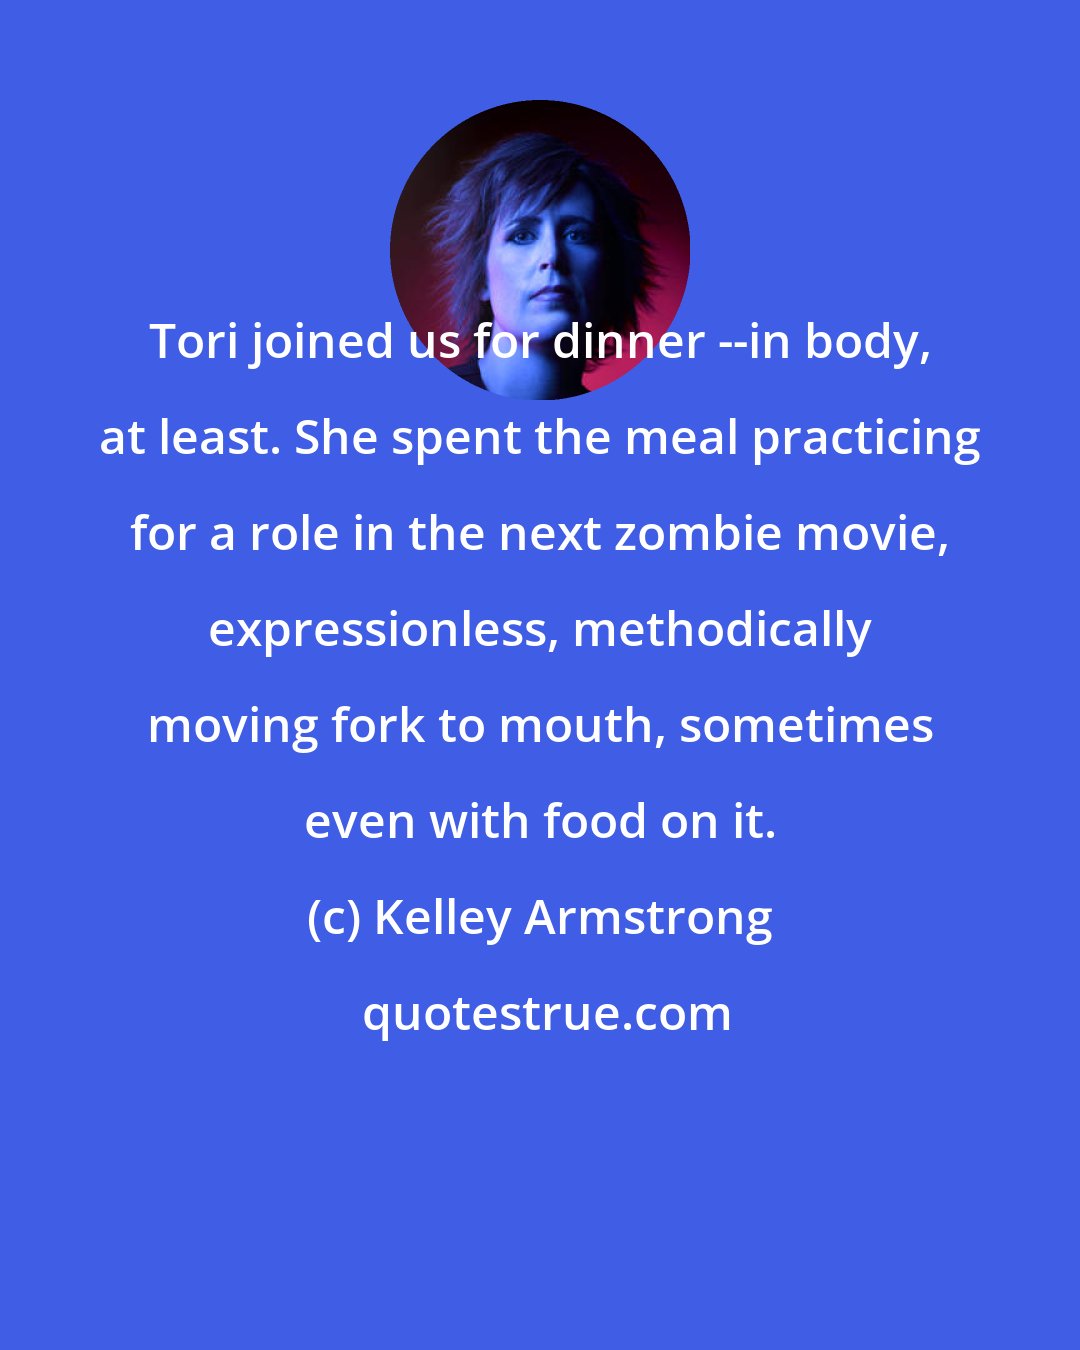 Kelley Armstrong: Tori joined us for dinner --in body, at least. She spent the meal practicing for a role in the next zombie movie, expressionless, methodically moving fork to mouth, sometimes even with food on it.